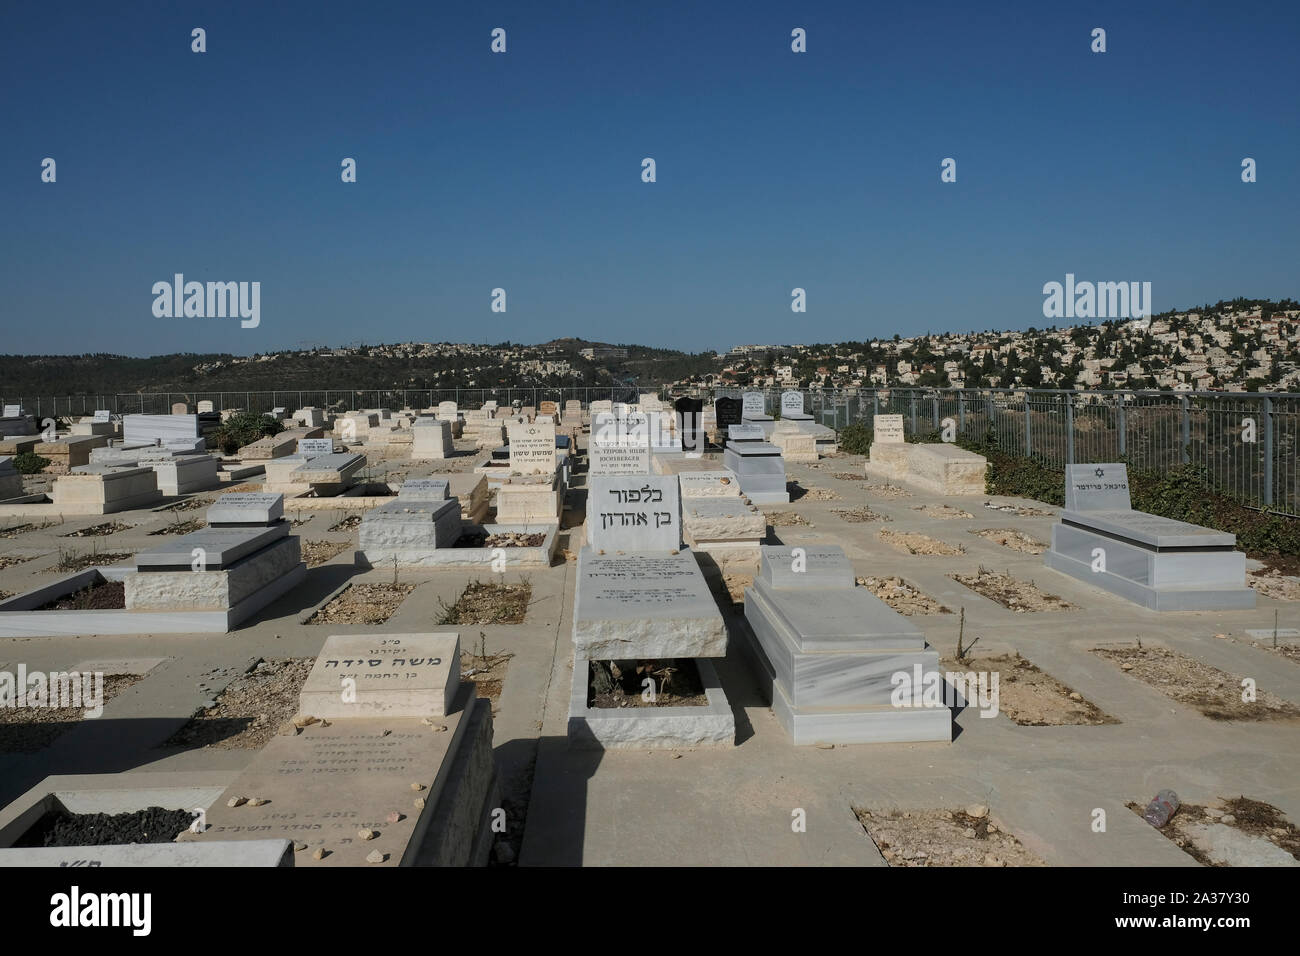 View of Mevaseret Zion and Motza local councils of Jerusalem across tombstones at Har HaMenuchot also known as Givat Shaul Cemetery the largest cemetery in West Jerusalem, Israel. Stock Photo